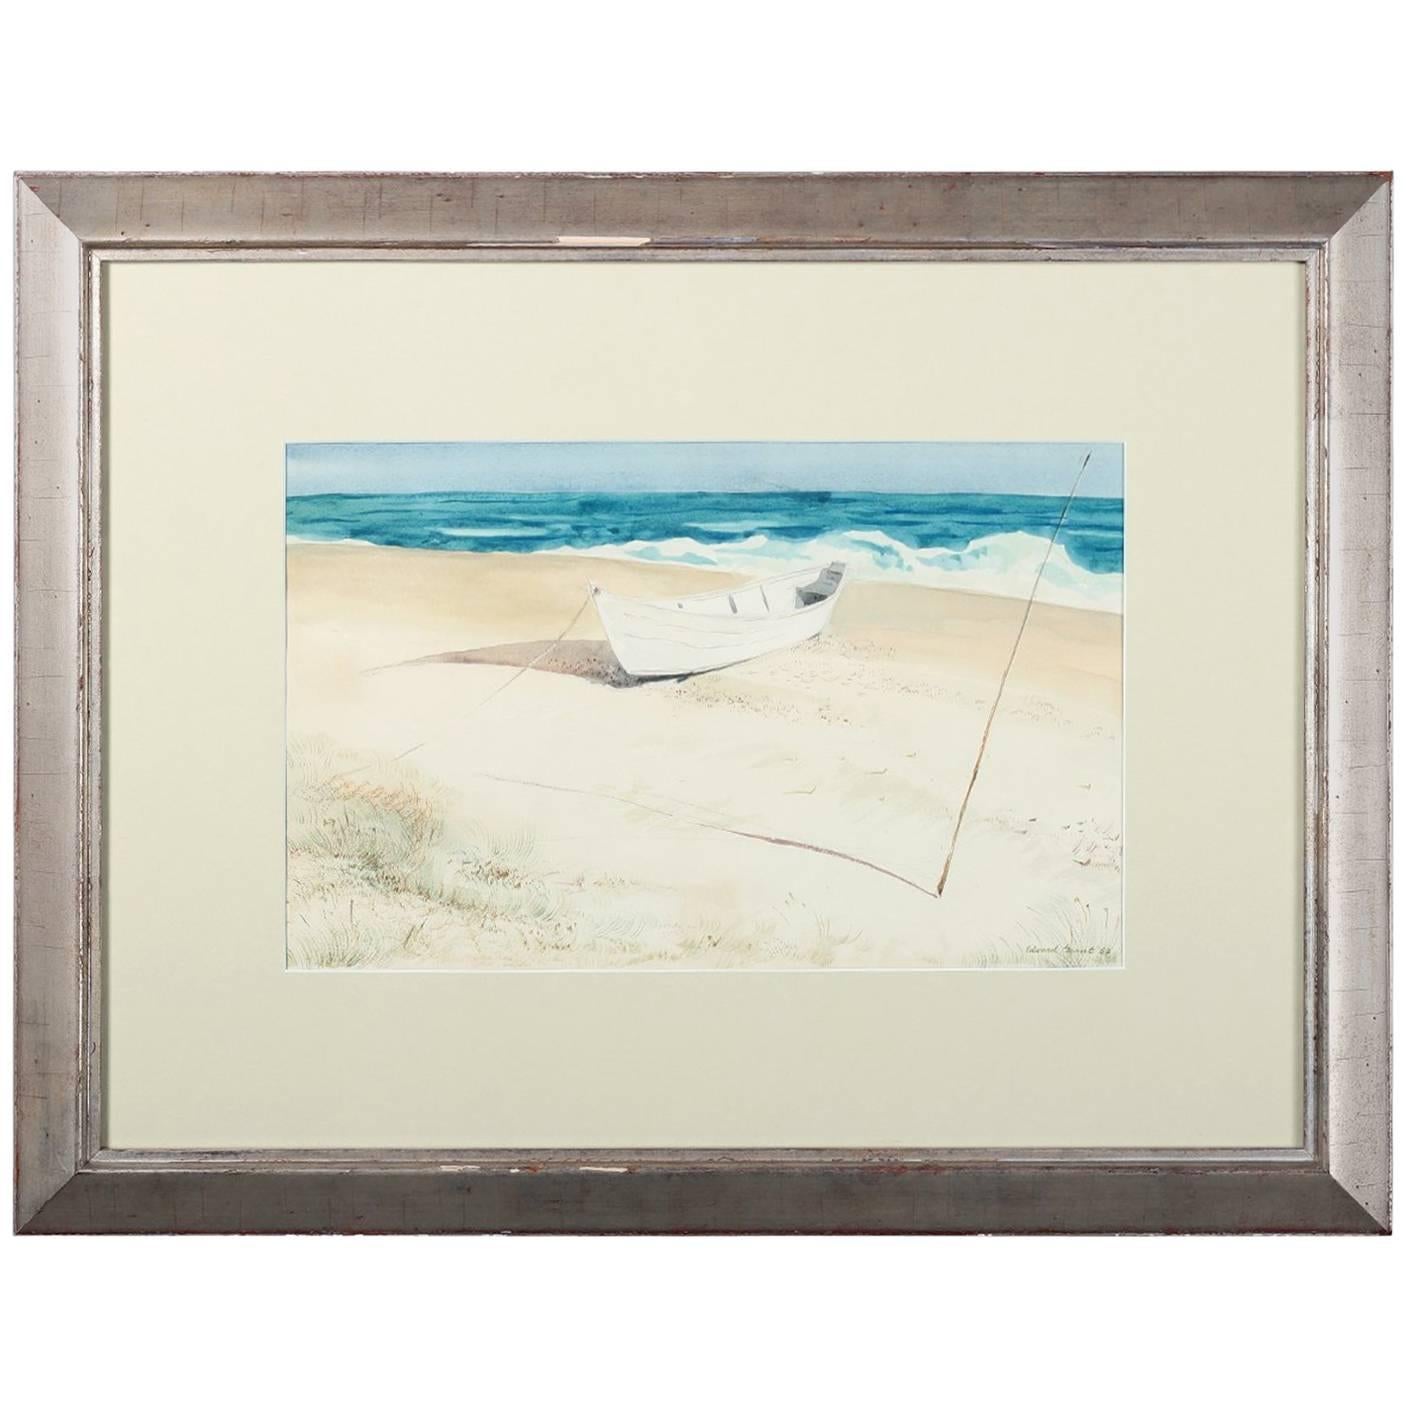 'Cape Henlopen' Watercolor Painting by American Artist Edward Grant, 1952 For Sale